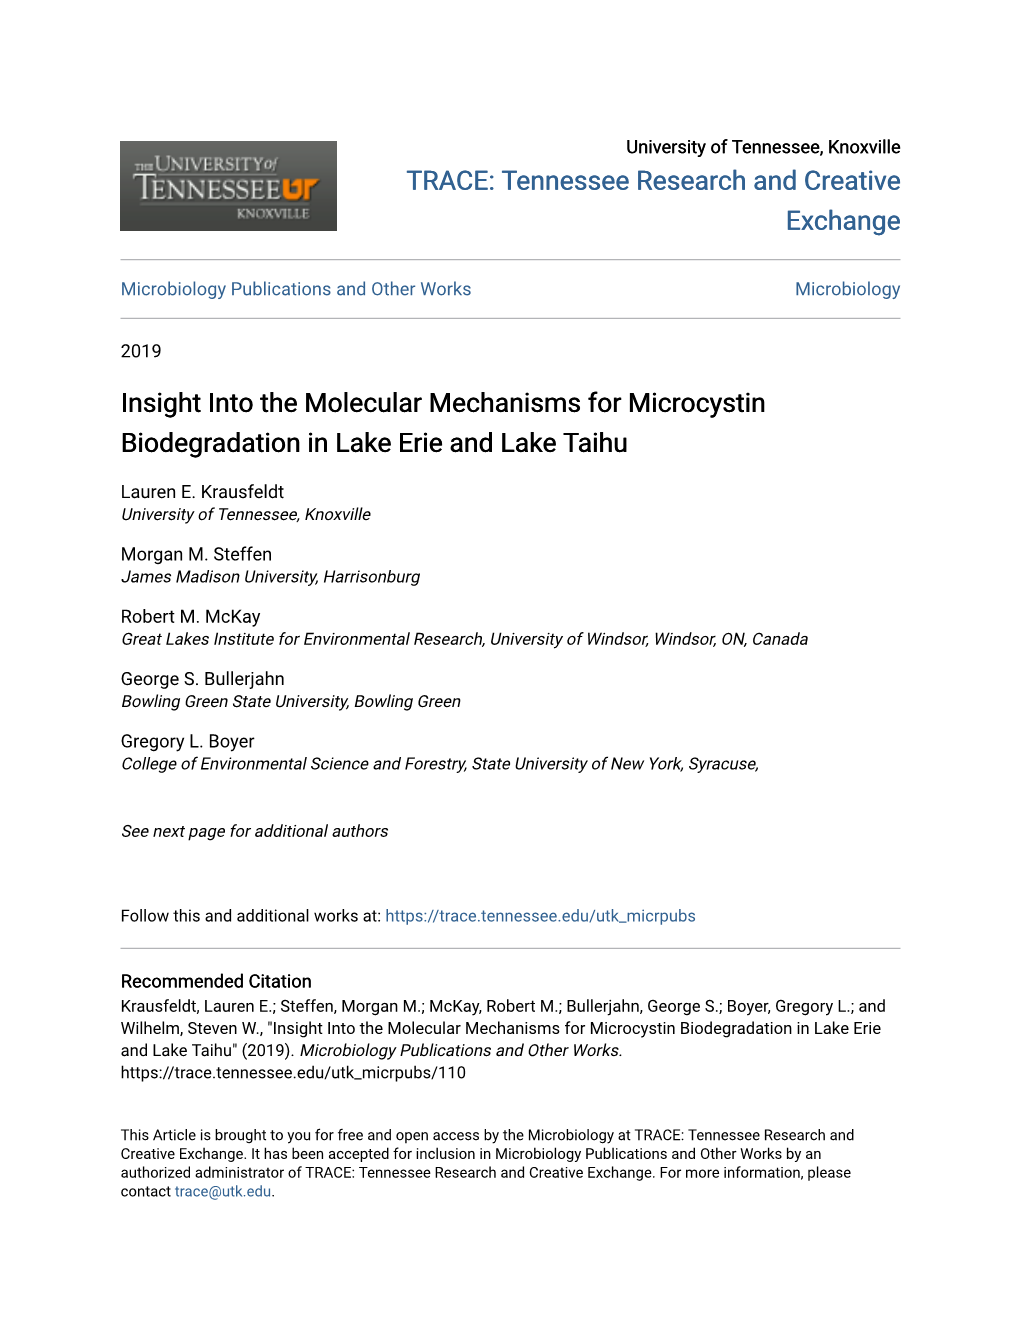 Insight Into the Molecular Mechanisms for Microcystin Biodegradation in Lake Erie and Lake Taihu